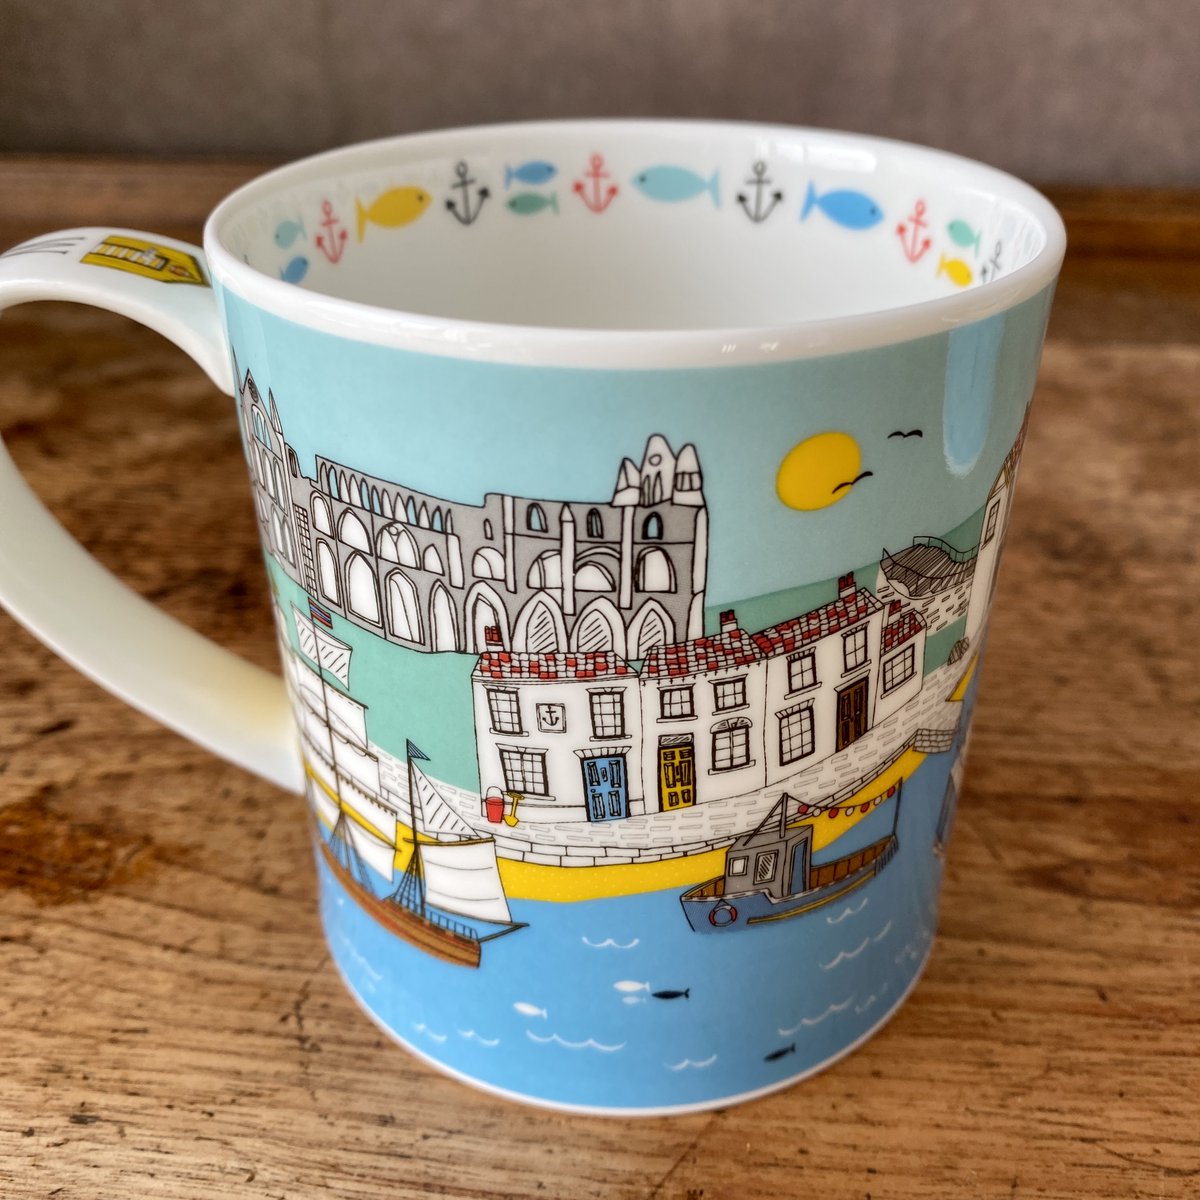 NEW SHAPE for our #Whitby Summer Mug, which is available in our local shops & to order online. 

Find out more > botham.co.uk/summer-whitby-…

#finebonechina #jessicahogarth #gloriouswhitby #summer #witheverysip #harbour #scene #dunoon #mug #tea #coffee #giftideas #holiday #momento